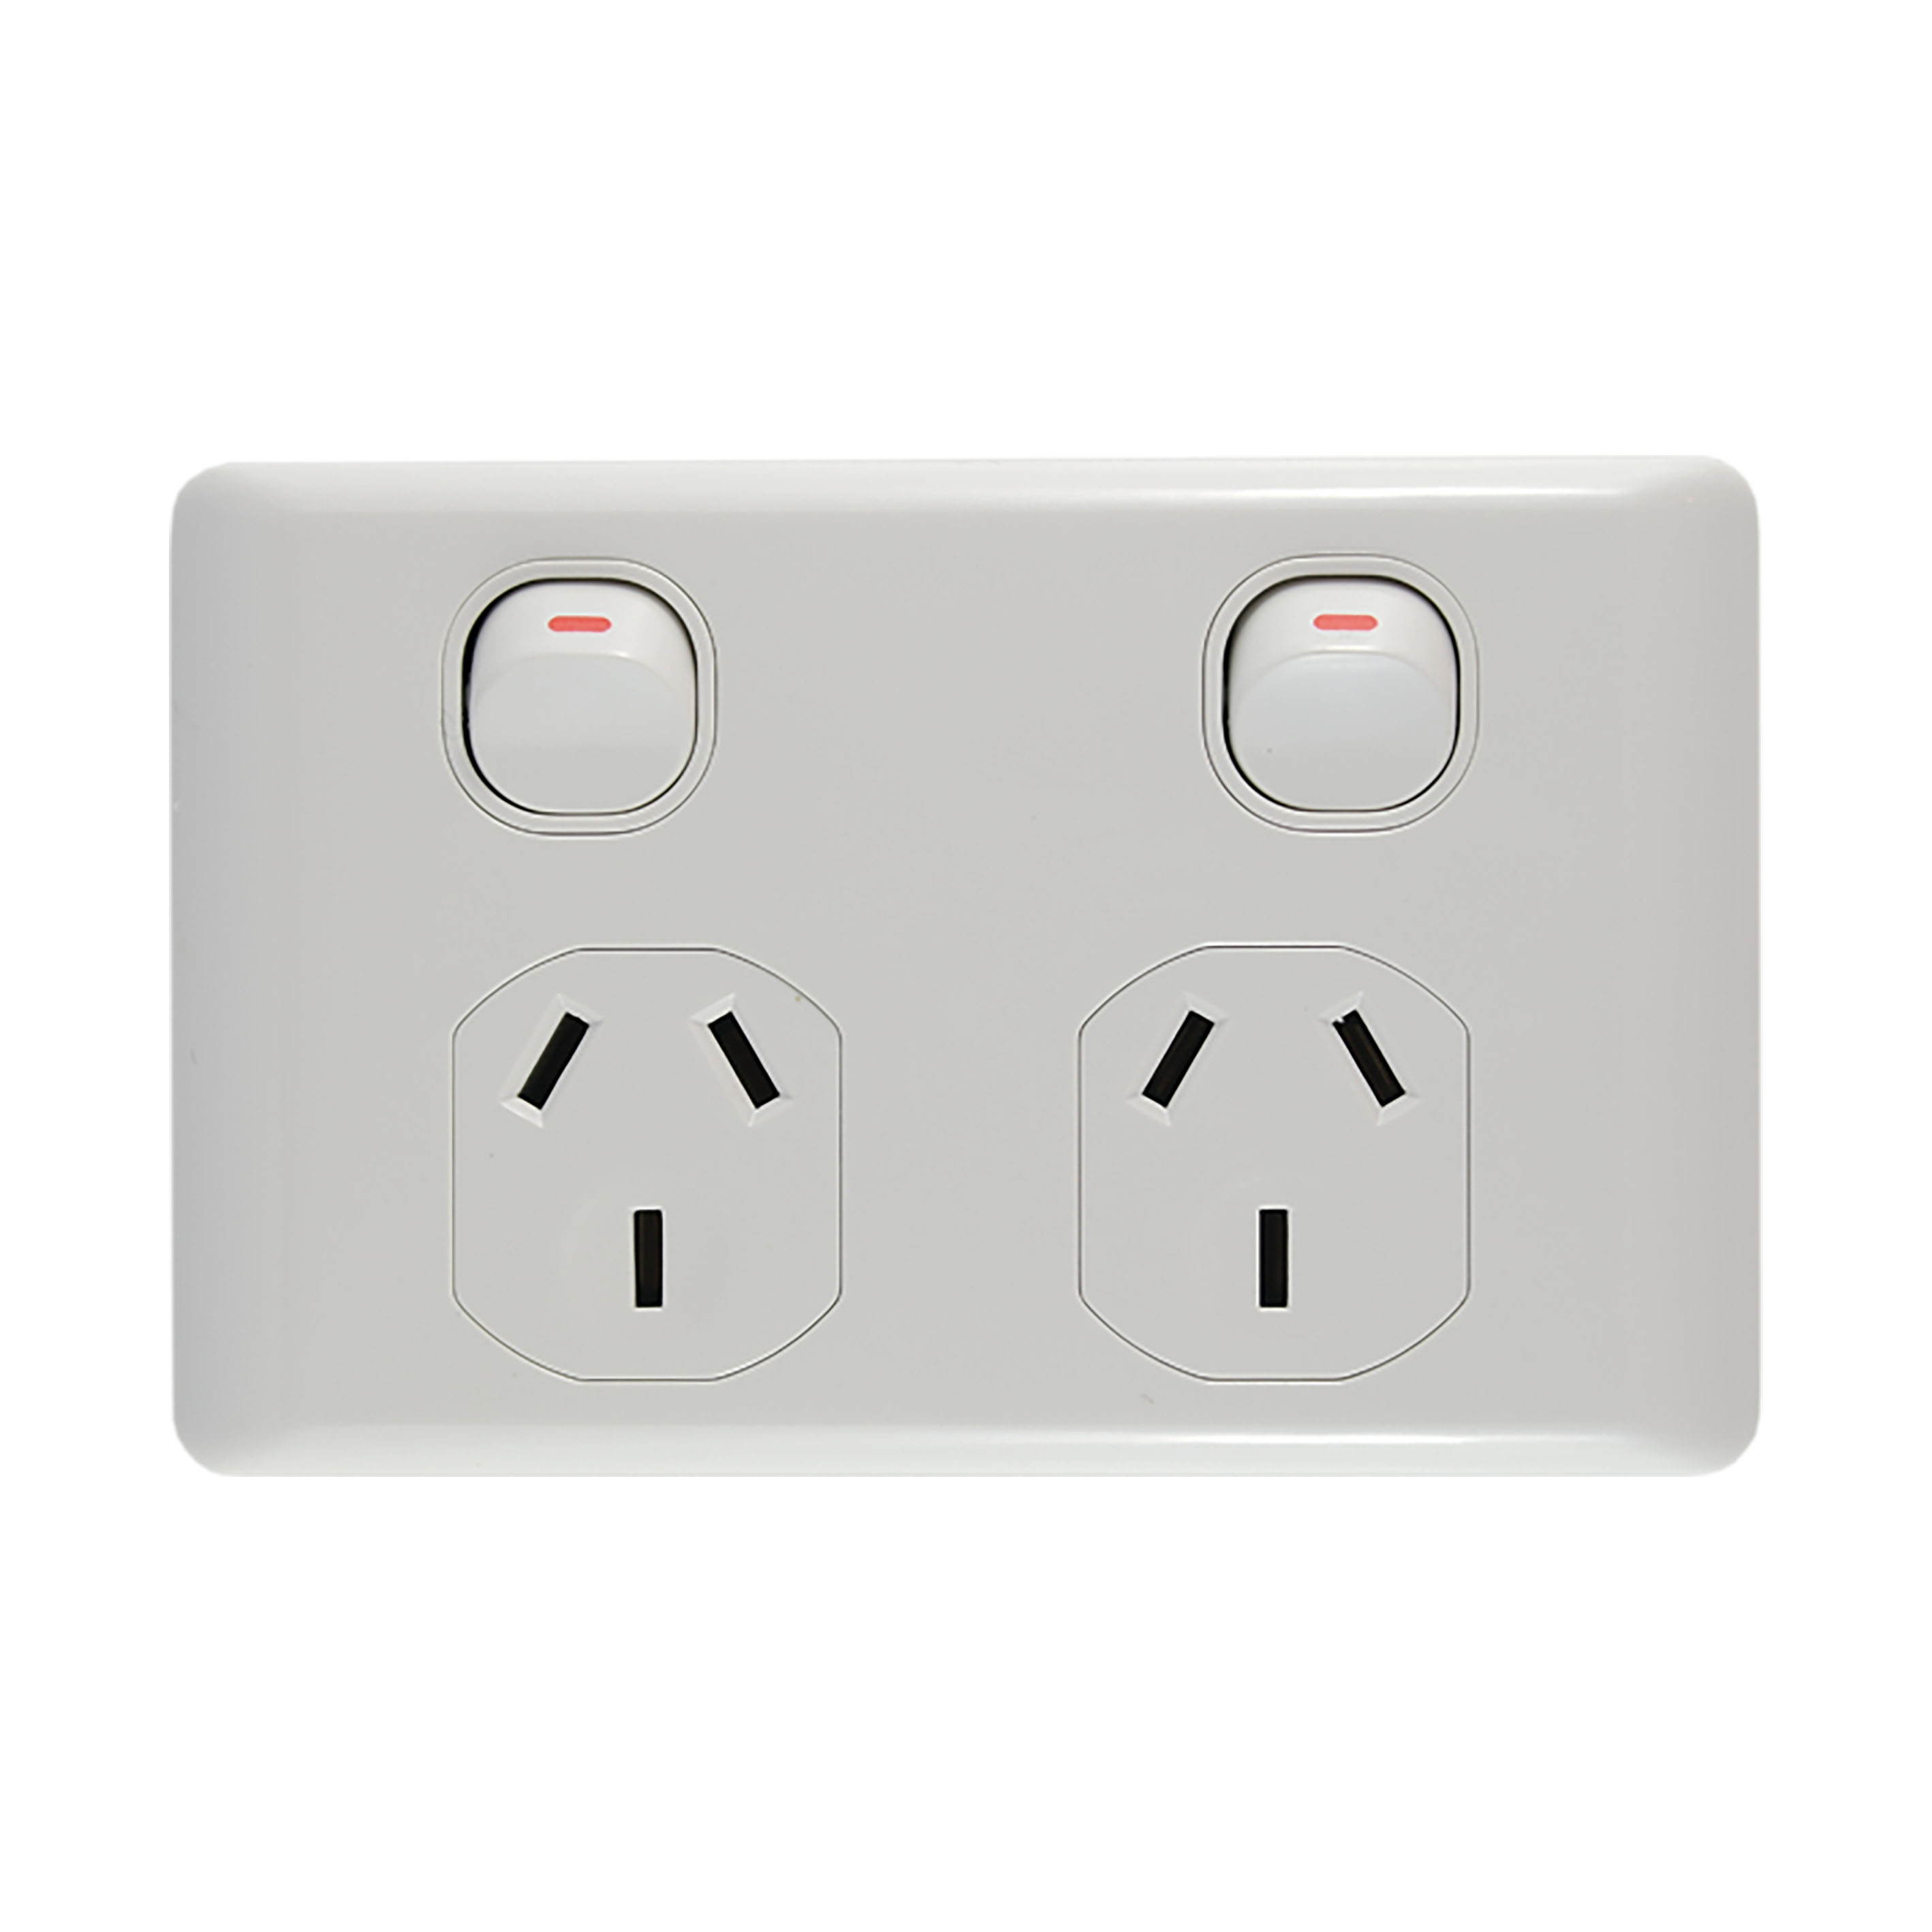 Power Outlets and Points